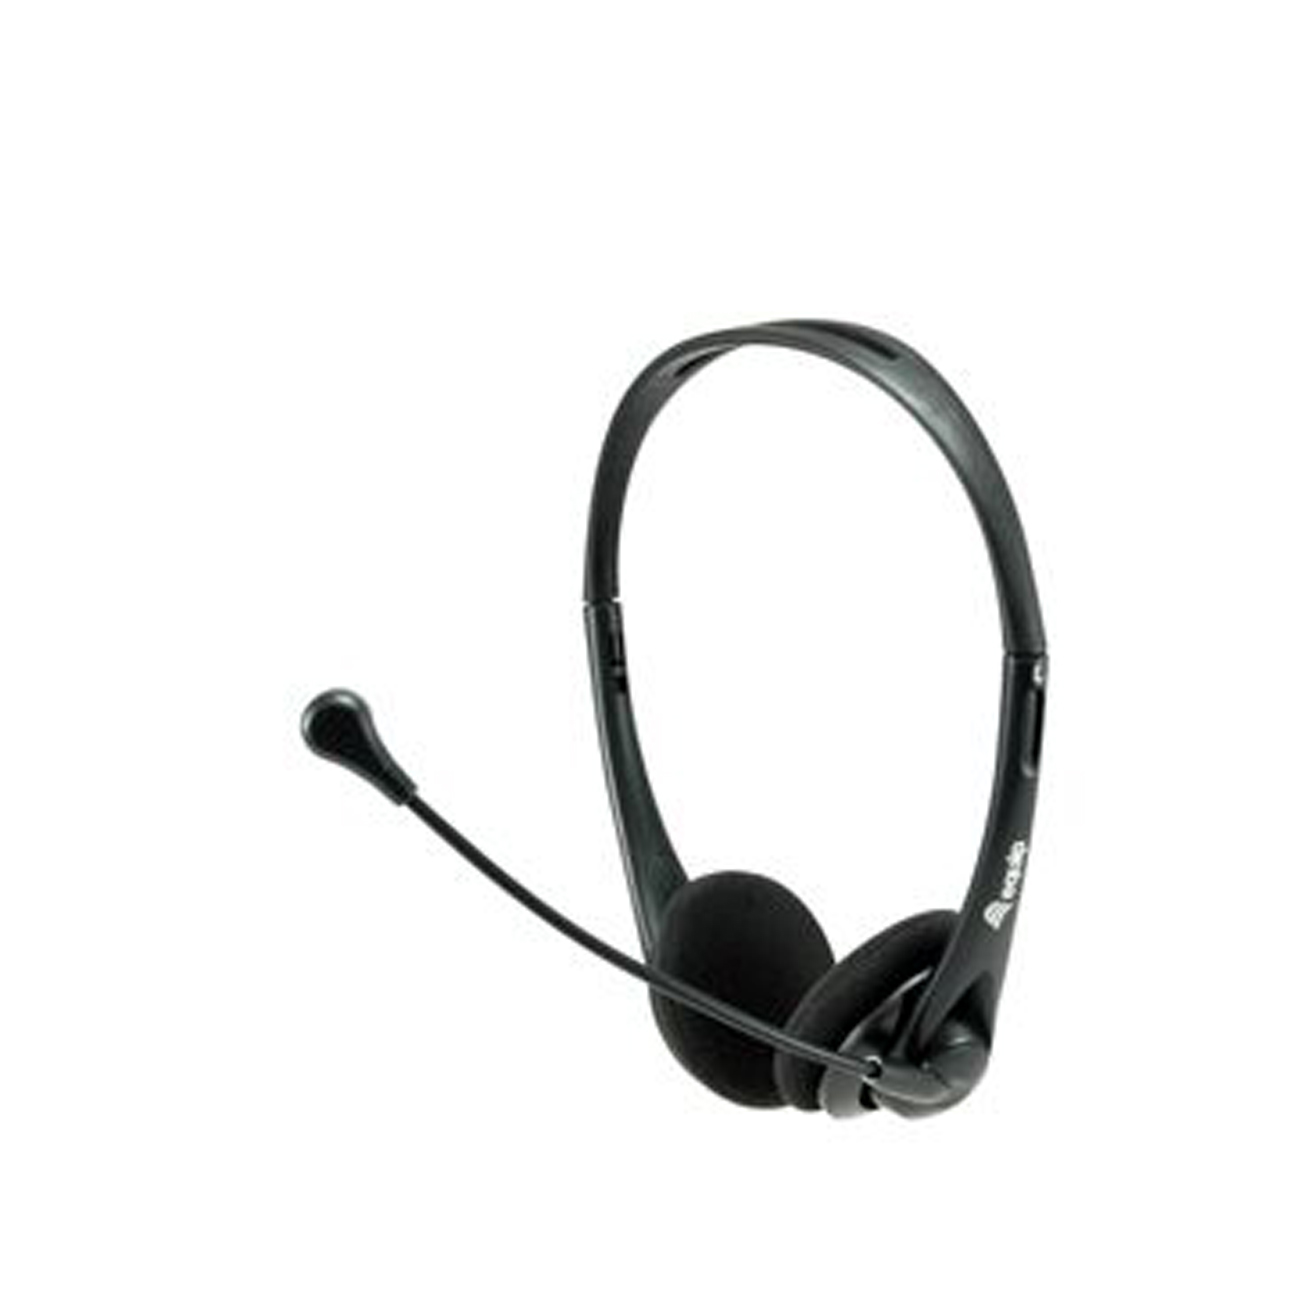 Equip Headset USB 245305 1.8m Kabel,Mikro,int.BedStereosw - 245305